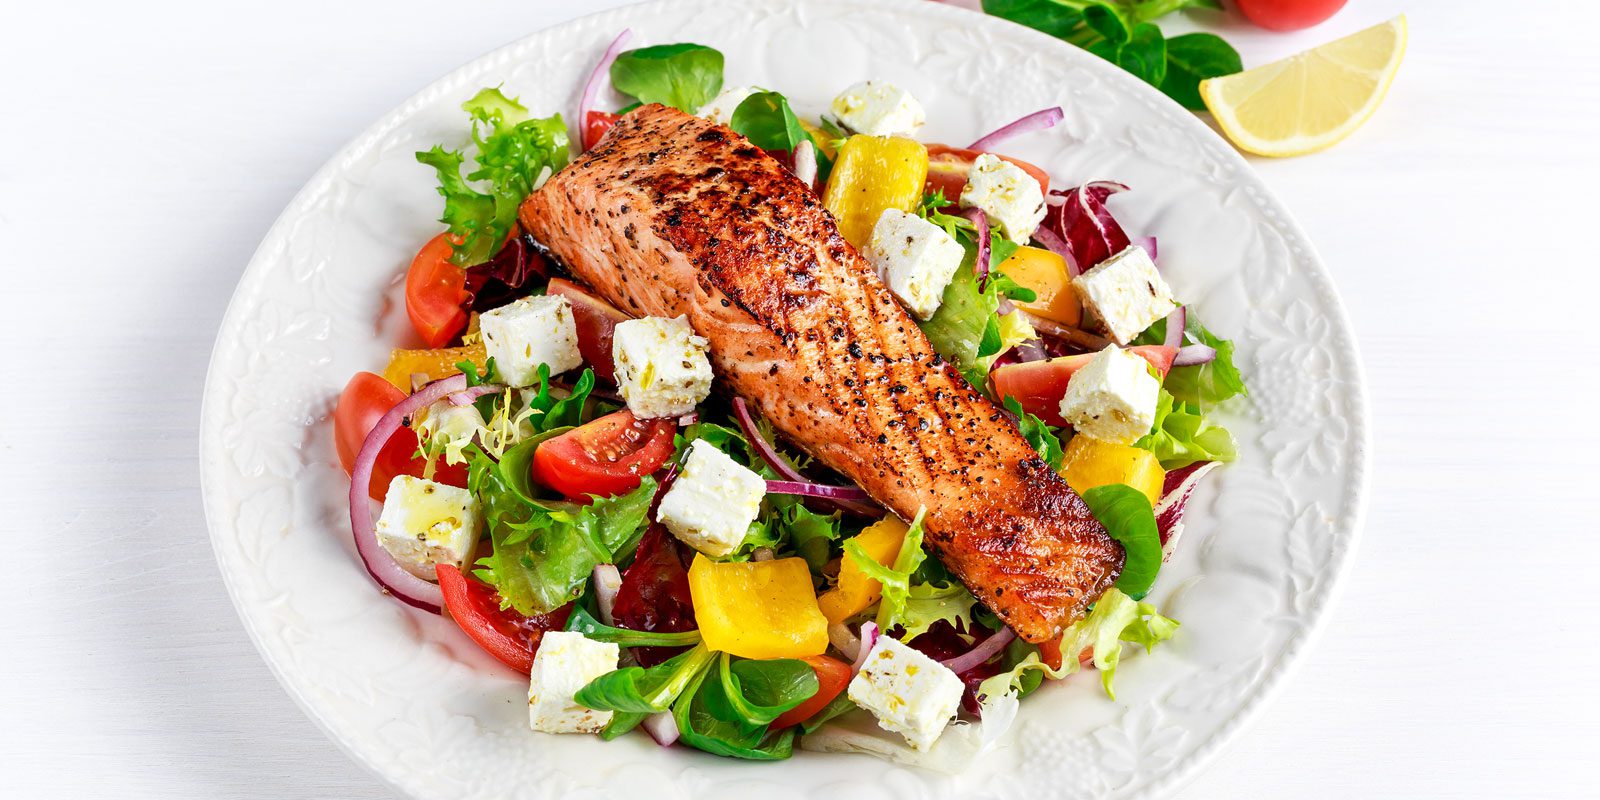 Baked Salmon With Salad